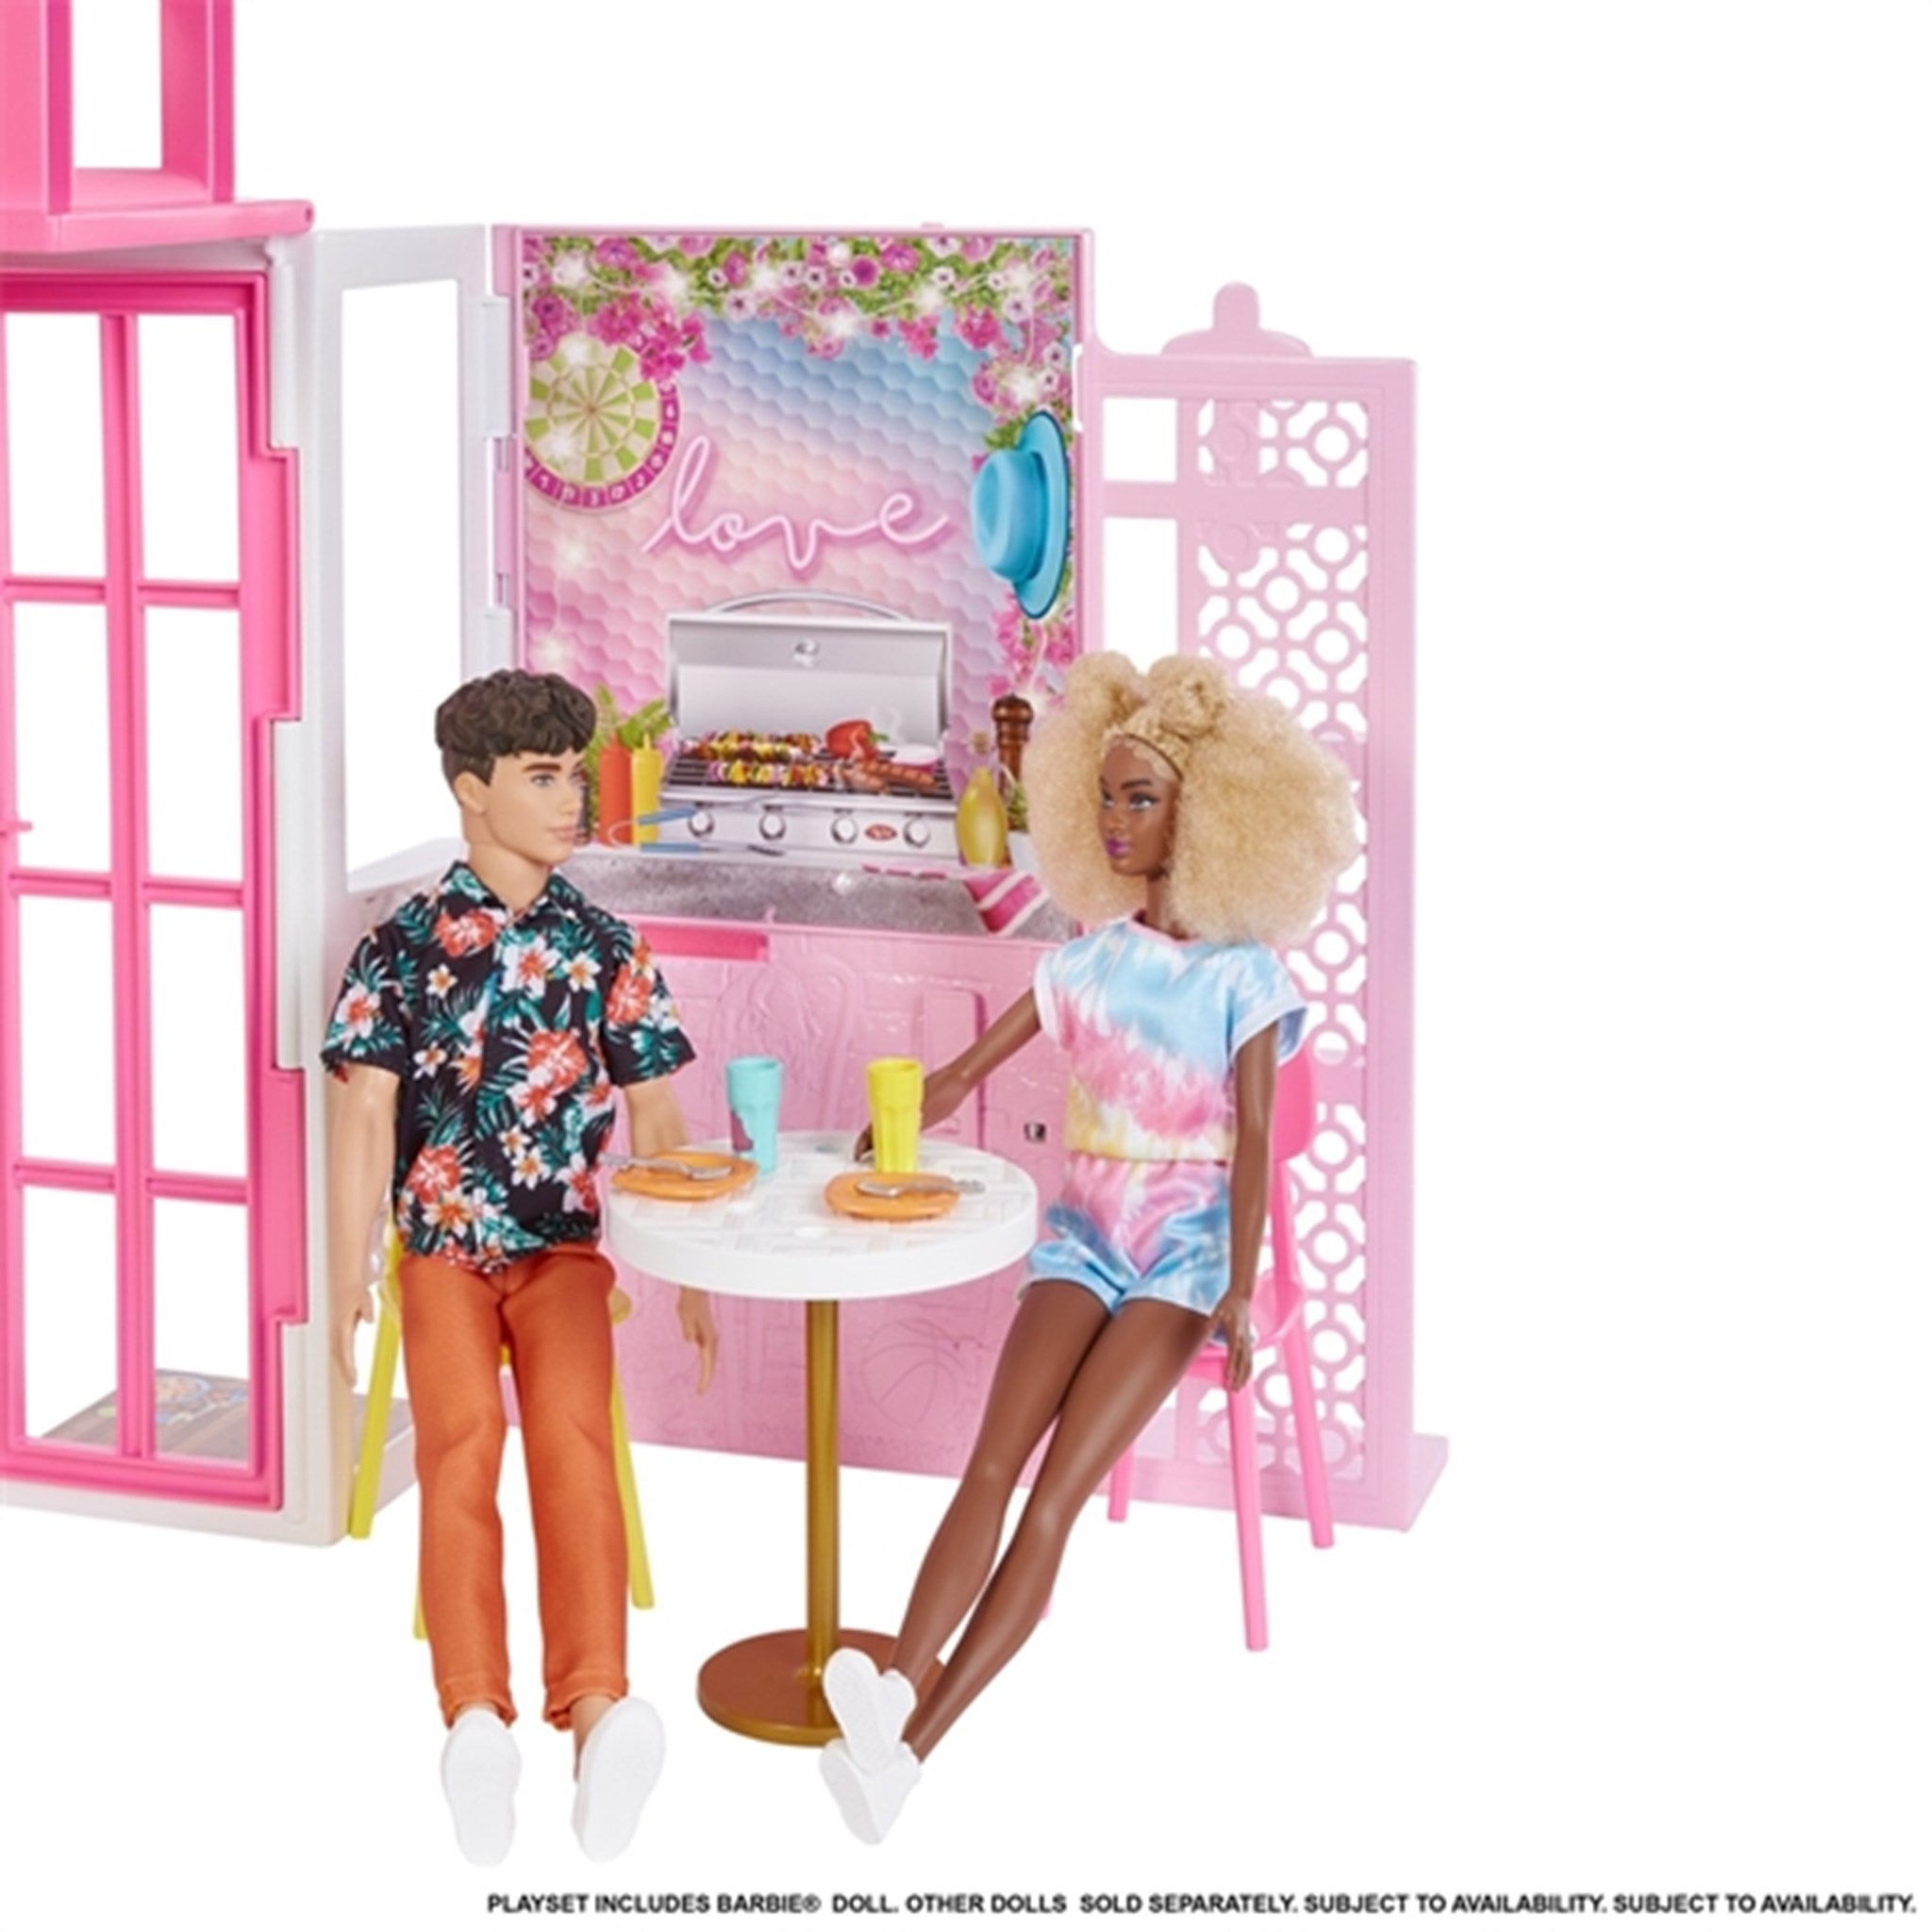 Barbie® Grab and Play Dollhouse Incl. Doll 9